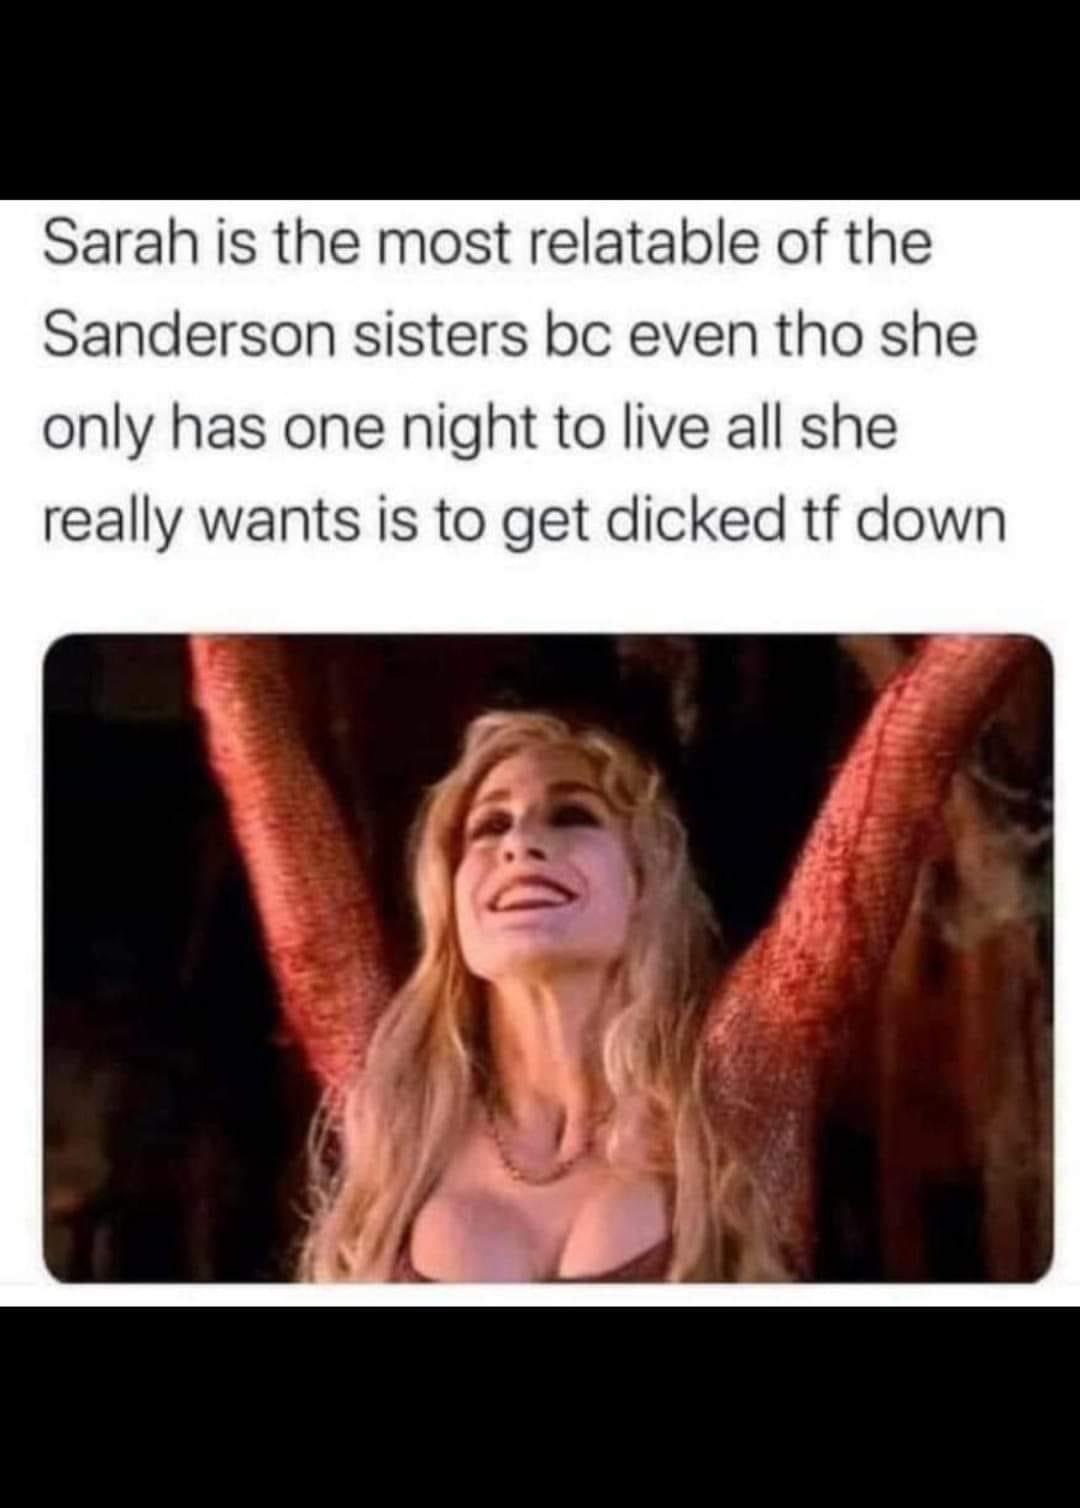 sarah jessica parker hocus pocus - Sarah is the most relatable of the Sanderson sisters bc even tho she only has one night to live all she really wants is to get dicked tf down